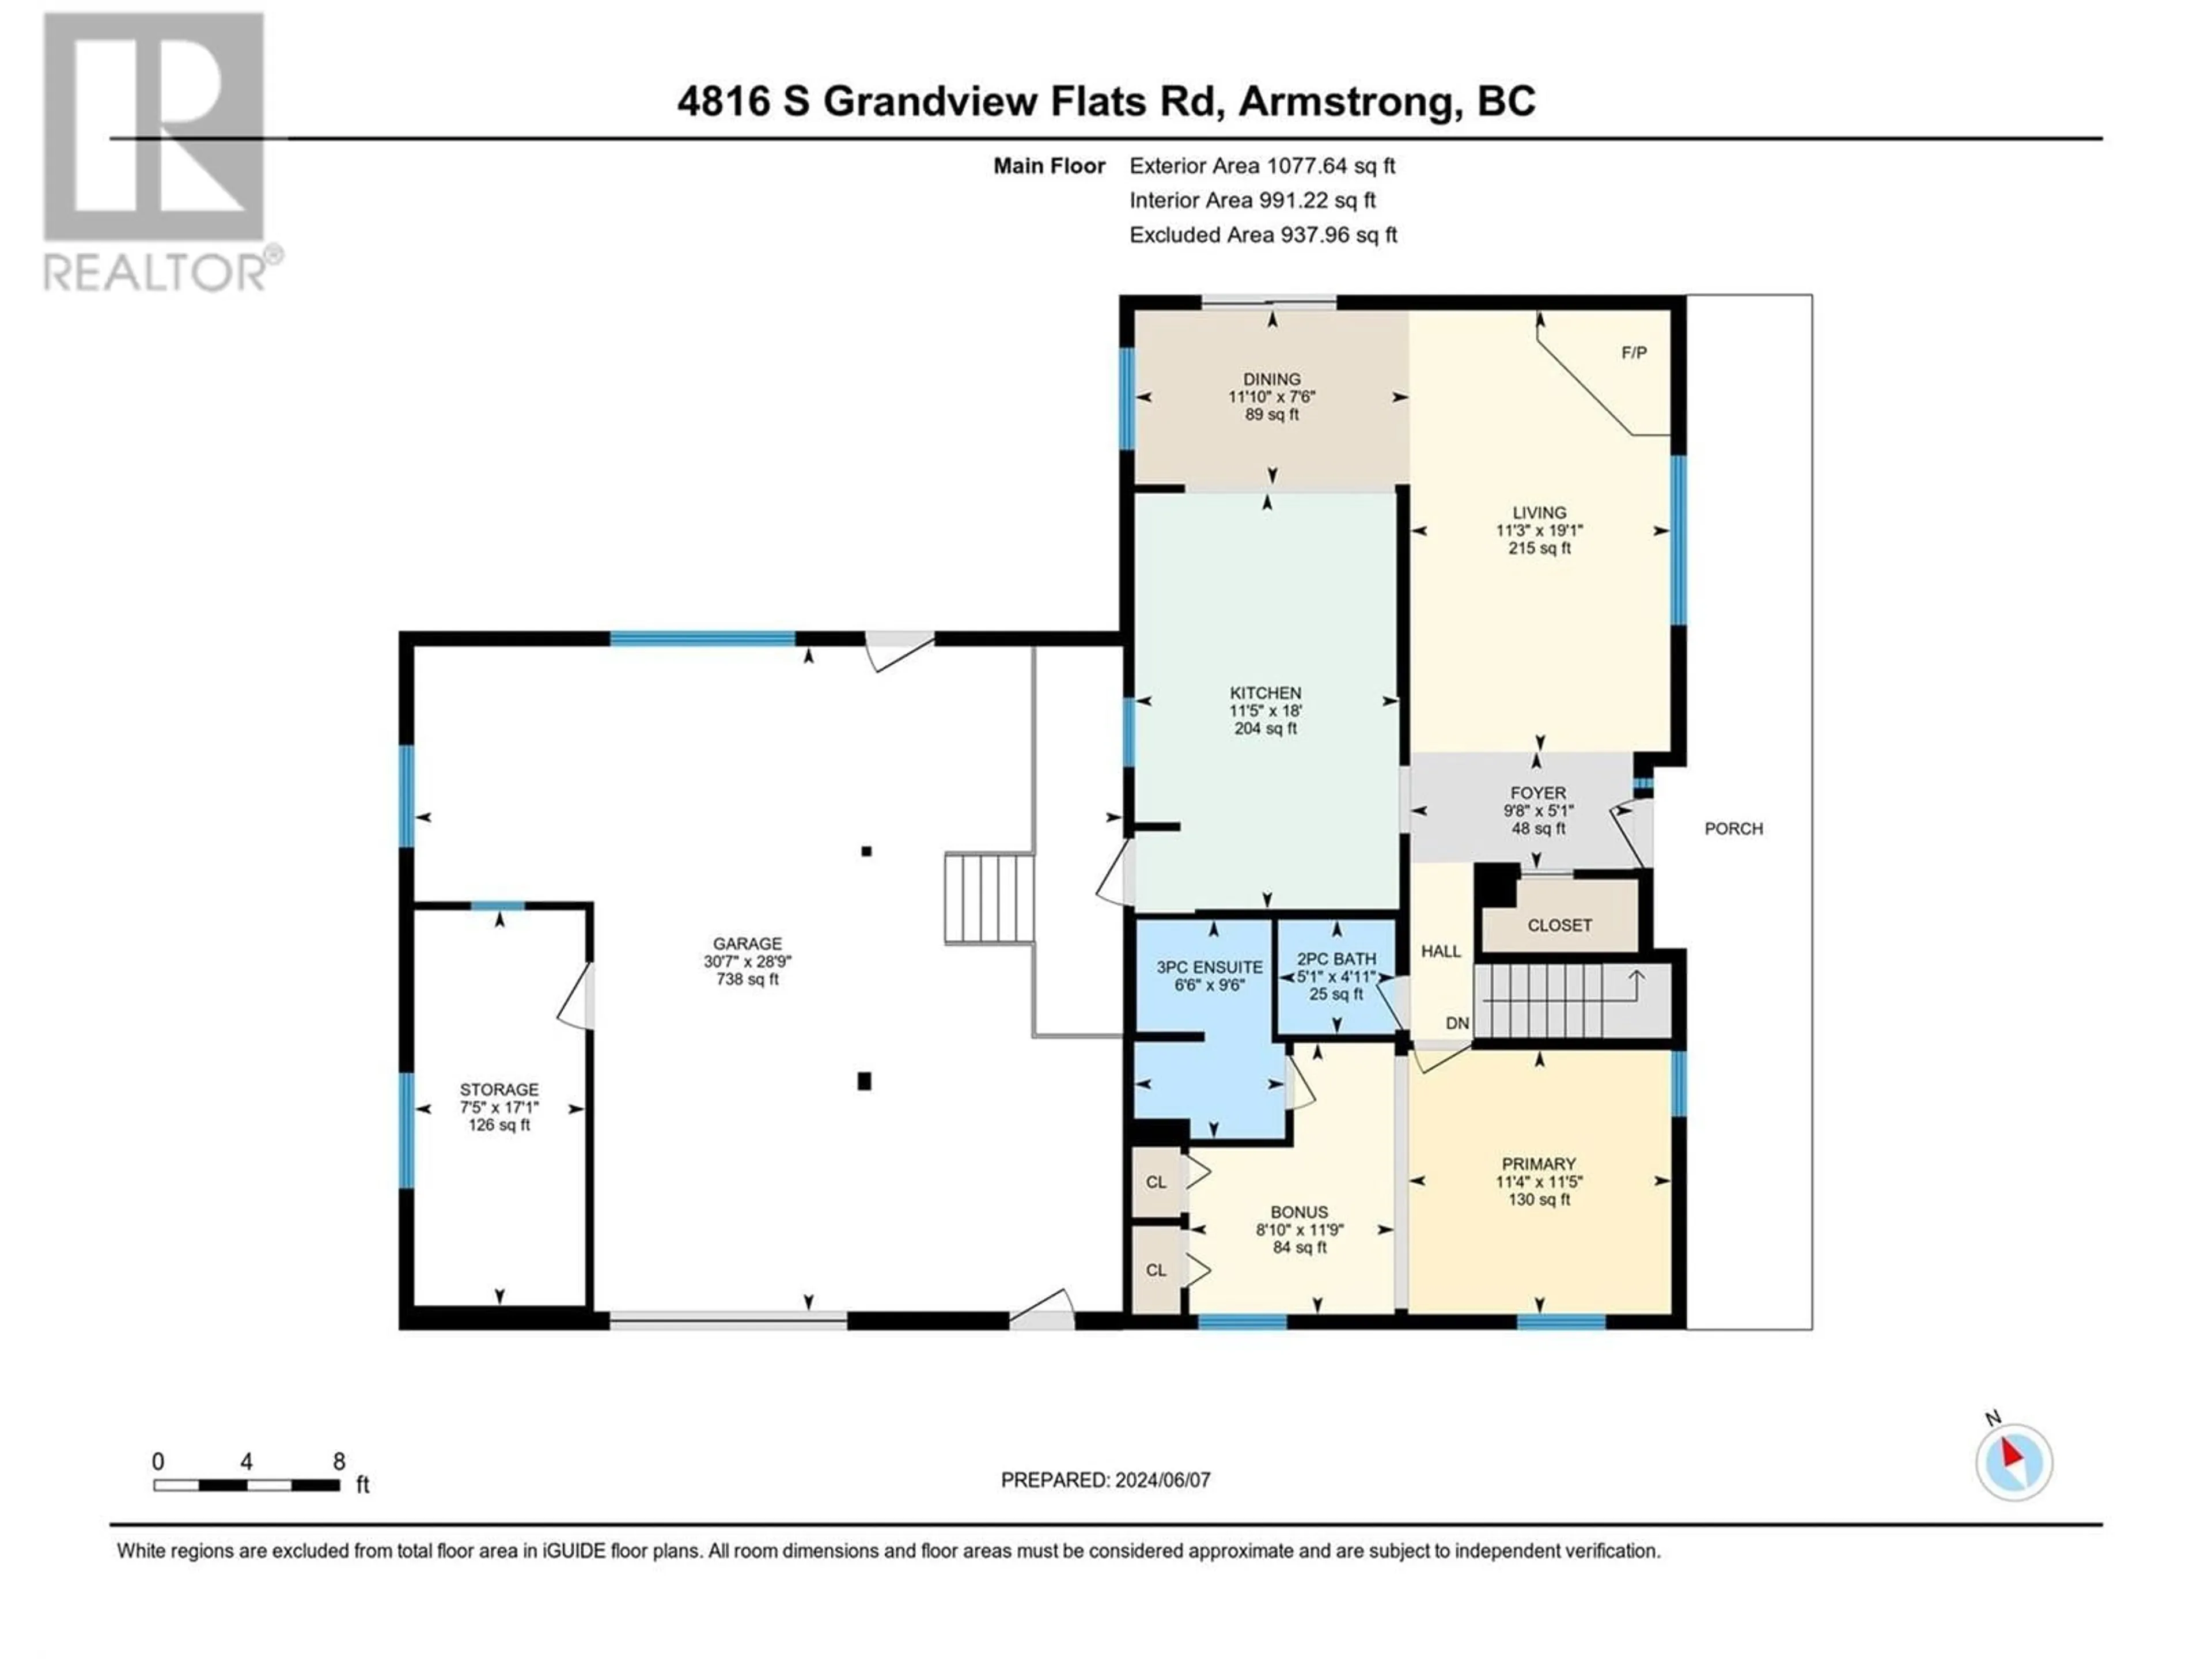 Floor plan for 4816 South Grandview Flats Road, Armstrong British Columbia V0E1B5